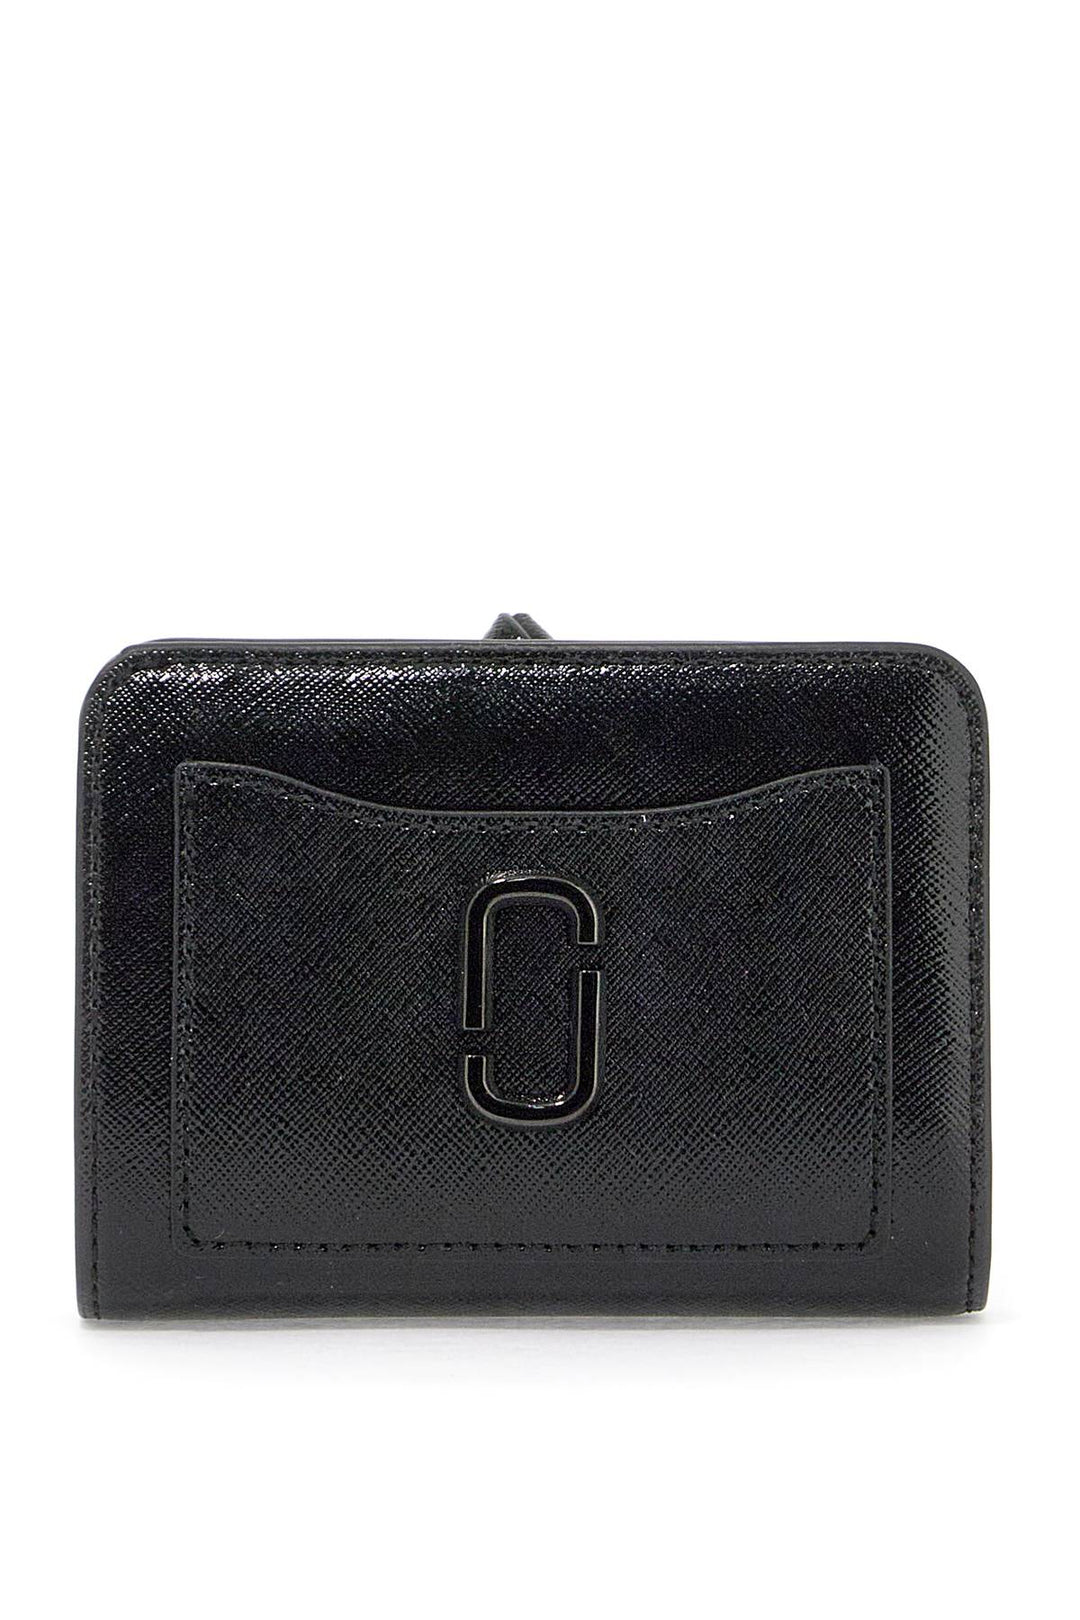 the utility snapshot mini compact wallet-0